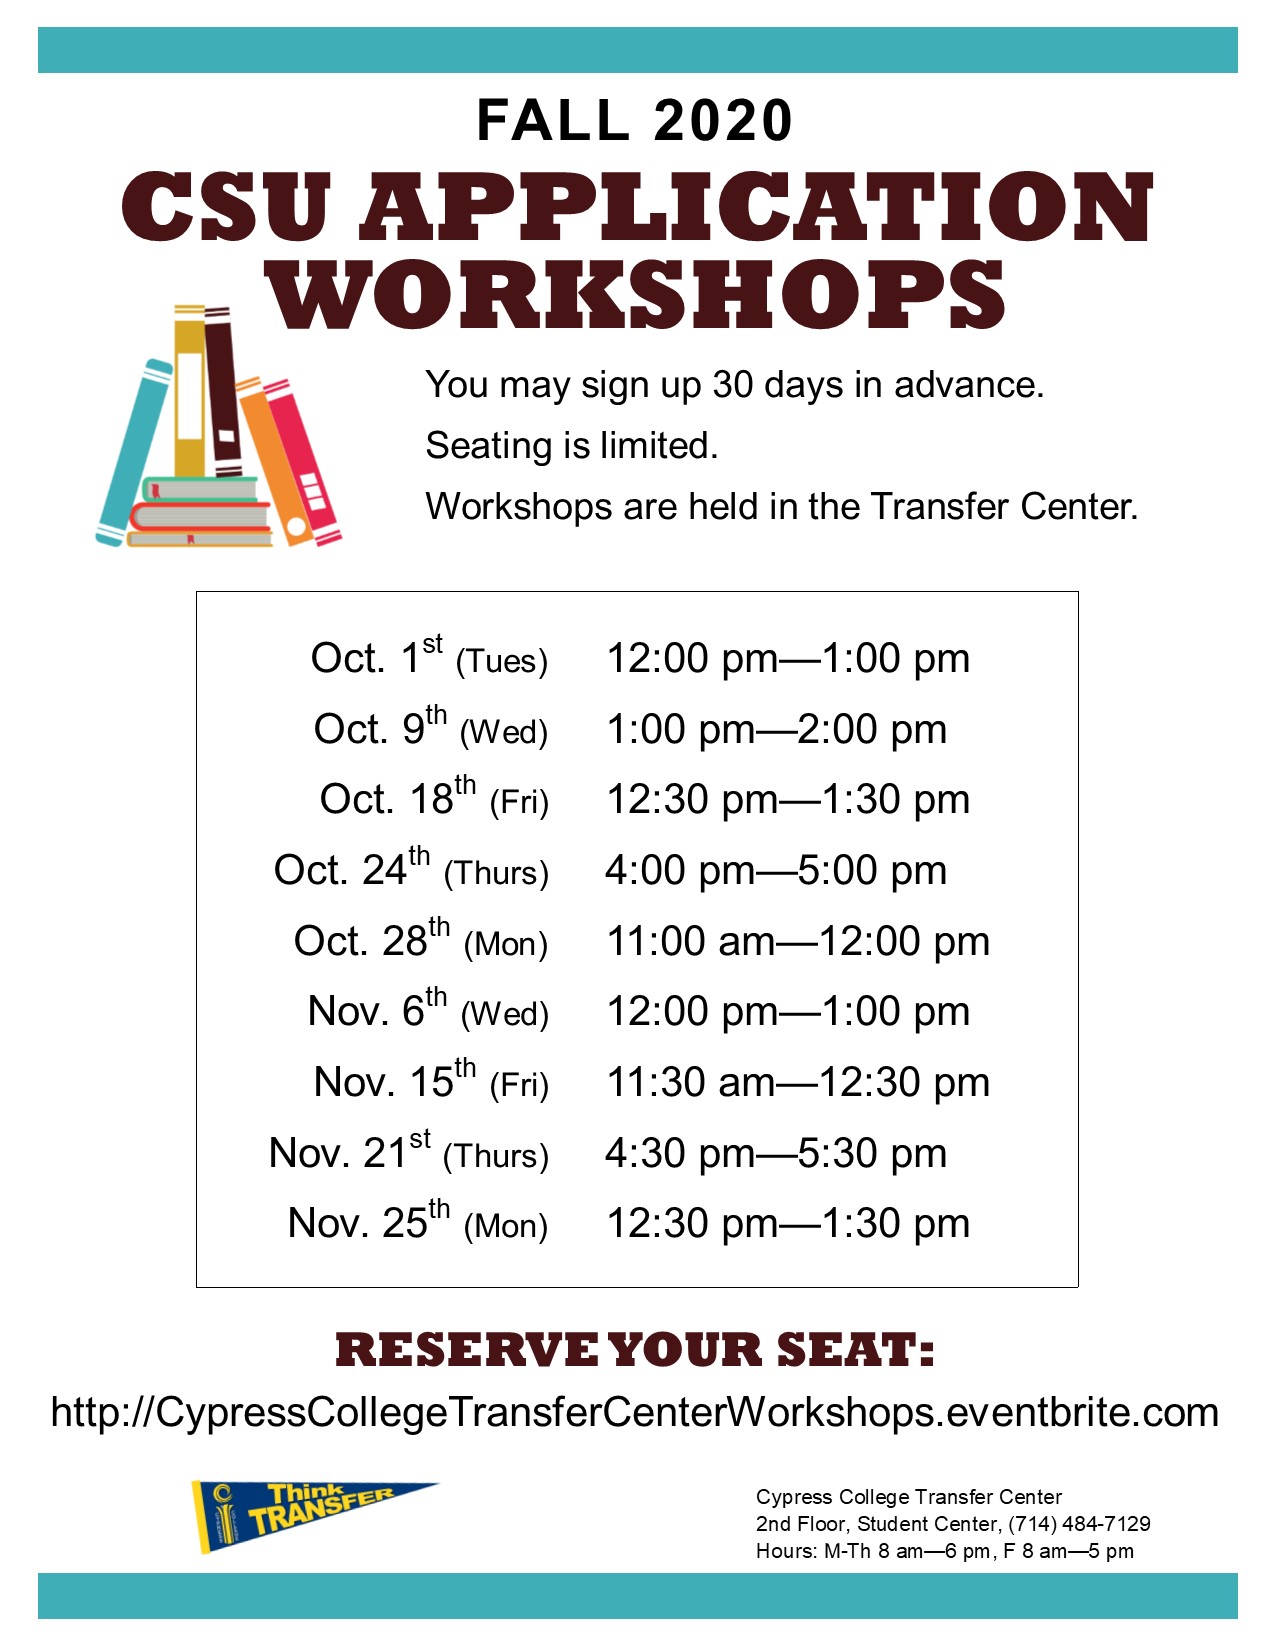 2019 CSU Application Workshops dates and times